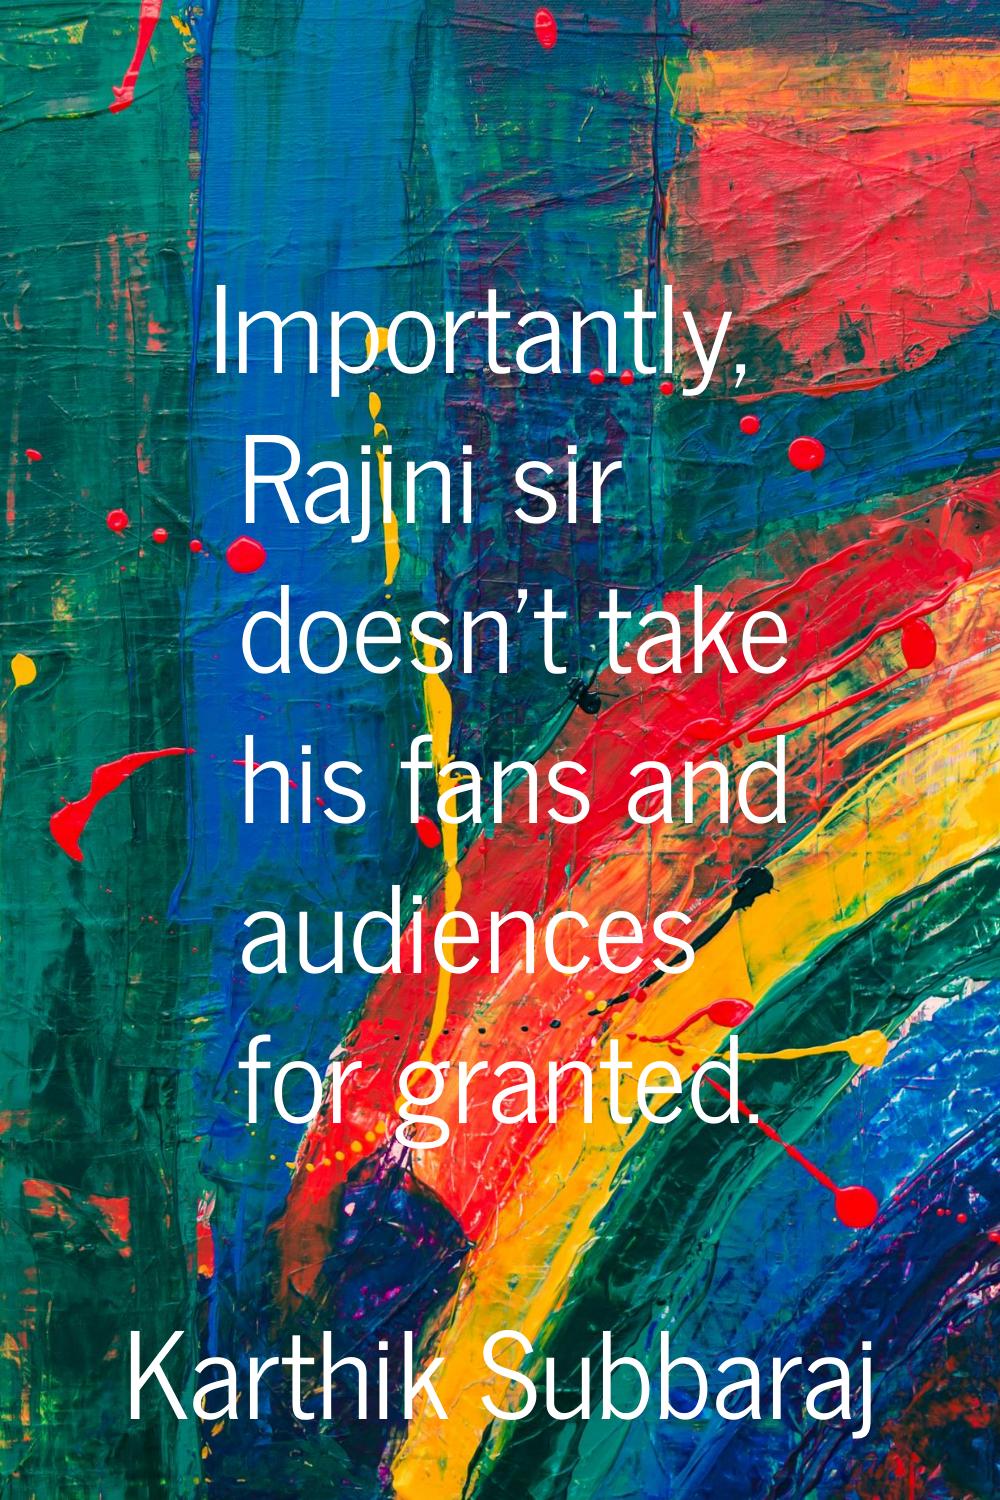 Importantly, Rajini sir doesn't take his fans and audiences for granted.